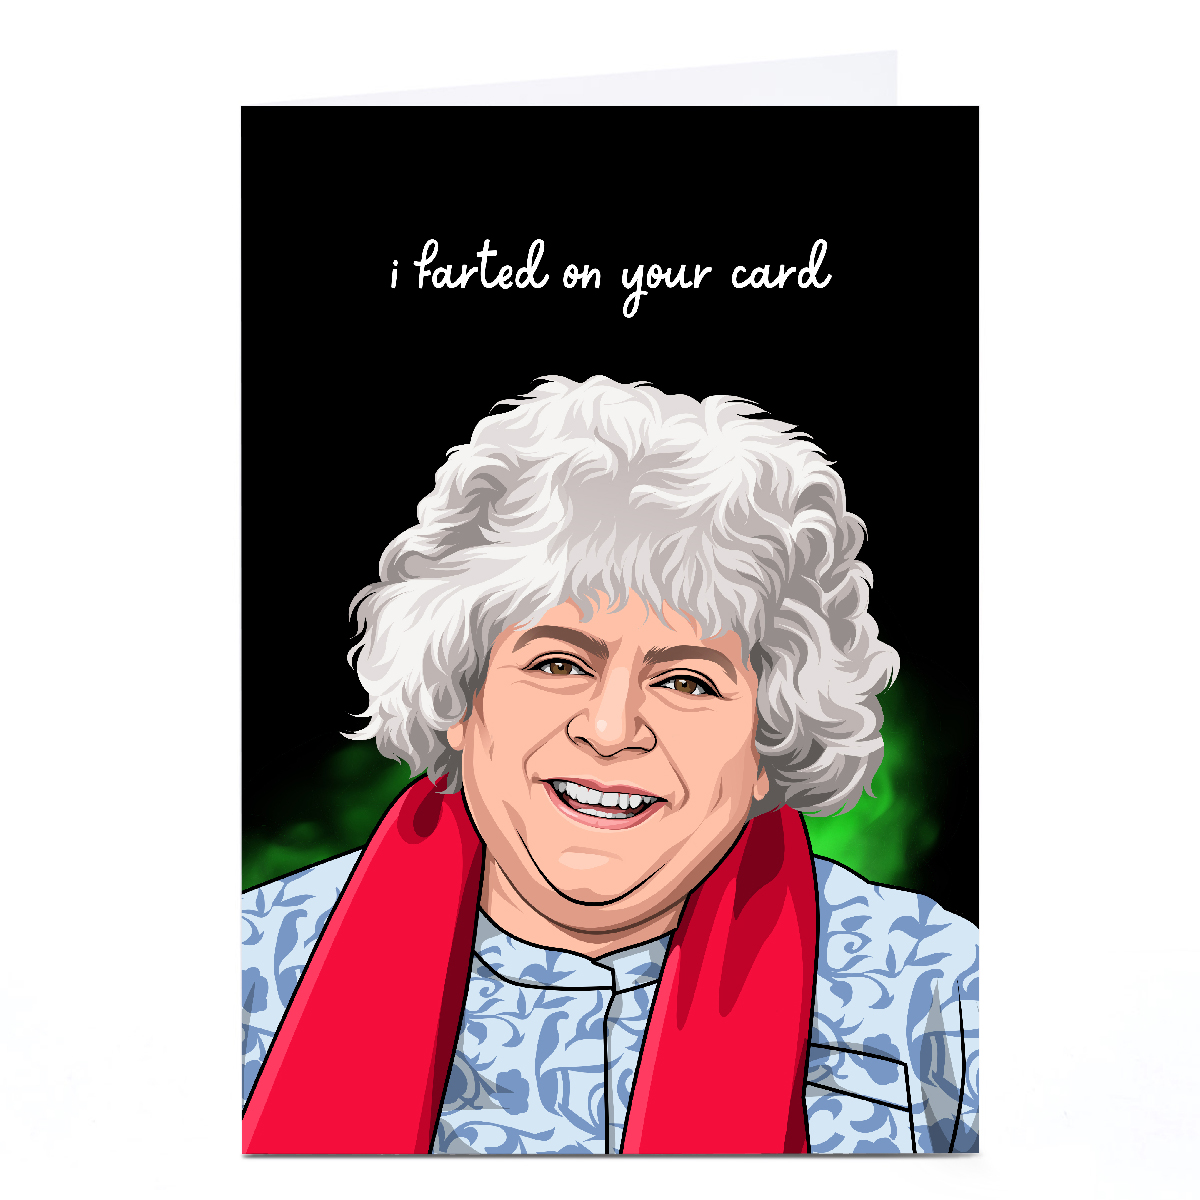 Personalised All Things Banter Card - Farted on Your Card